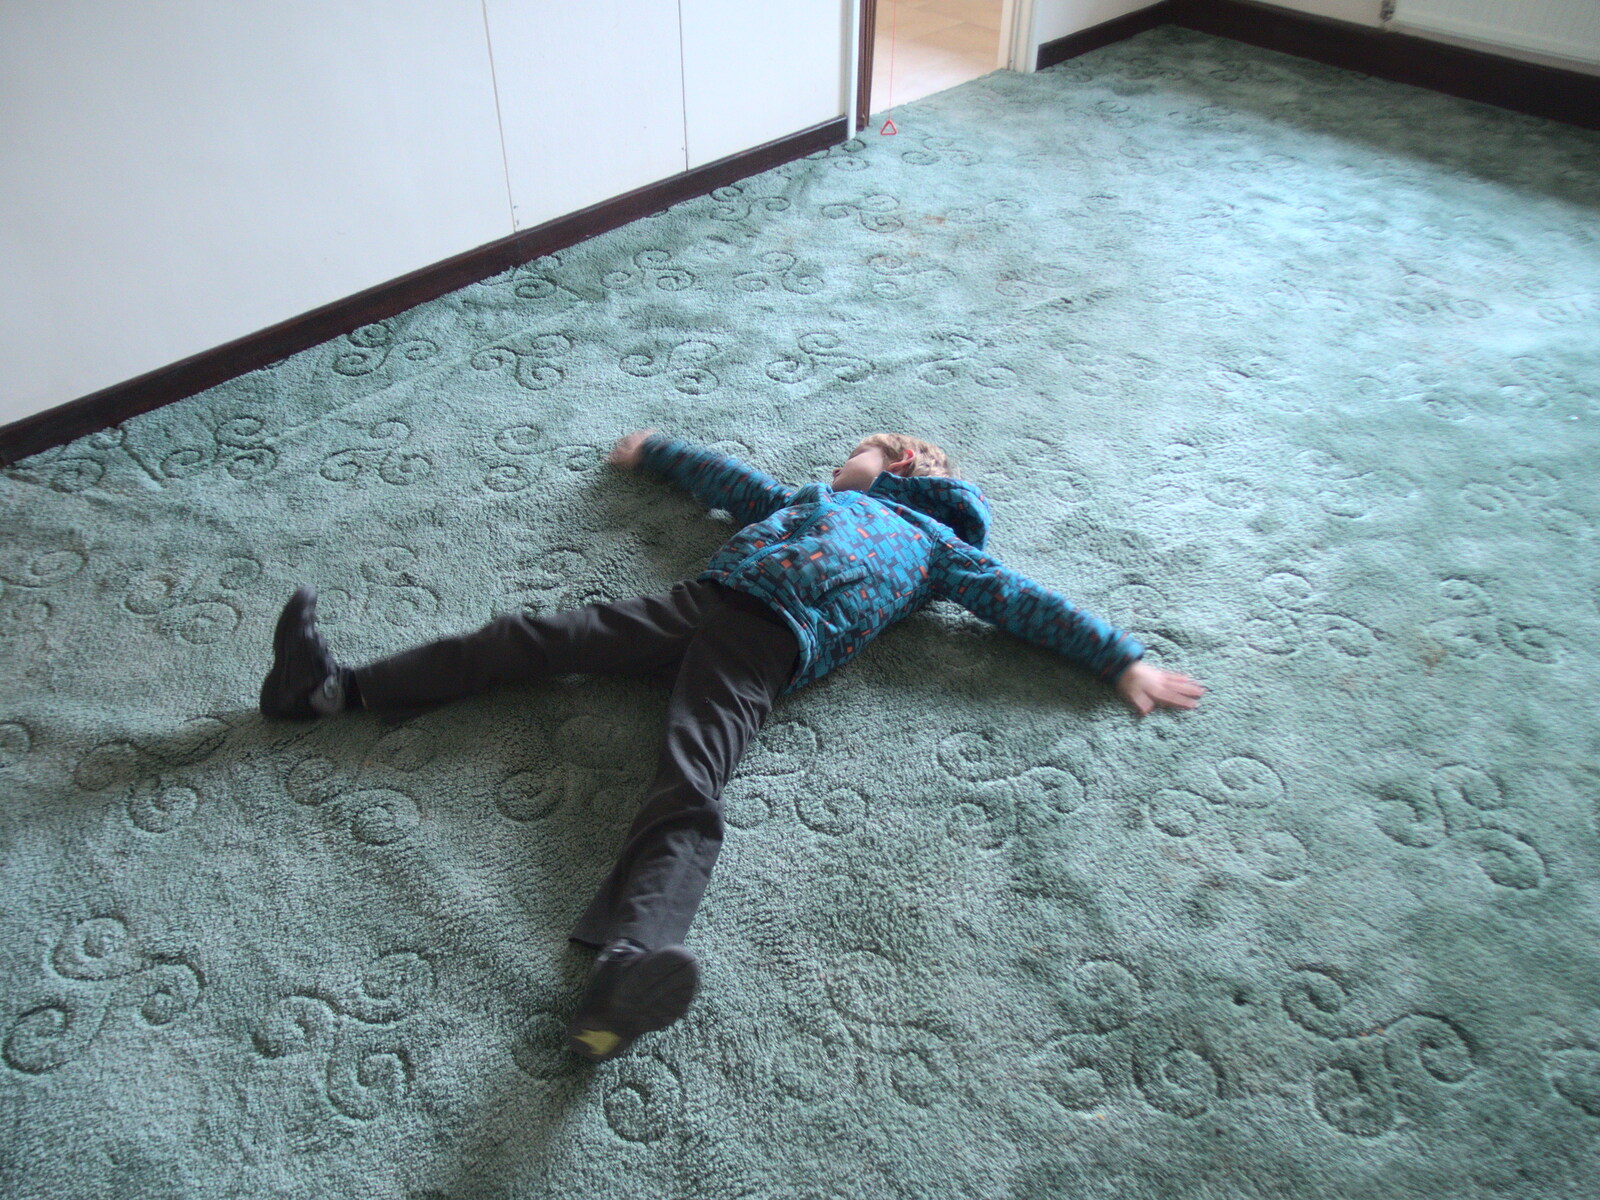 Harry does some sort of carpet angel from The G-Unit Moves In, Eye, Suffolk - 4th March 2019